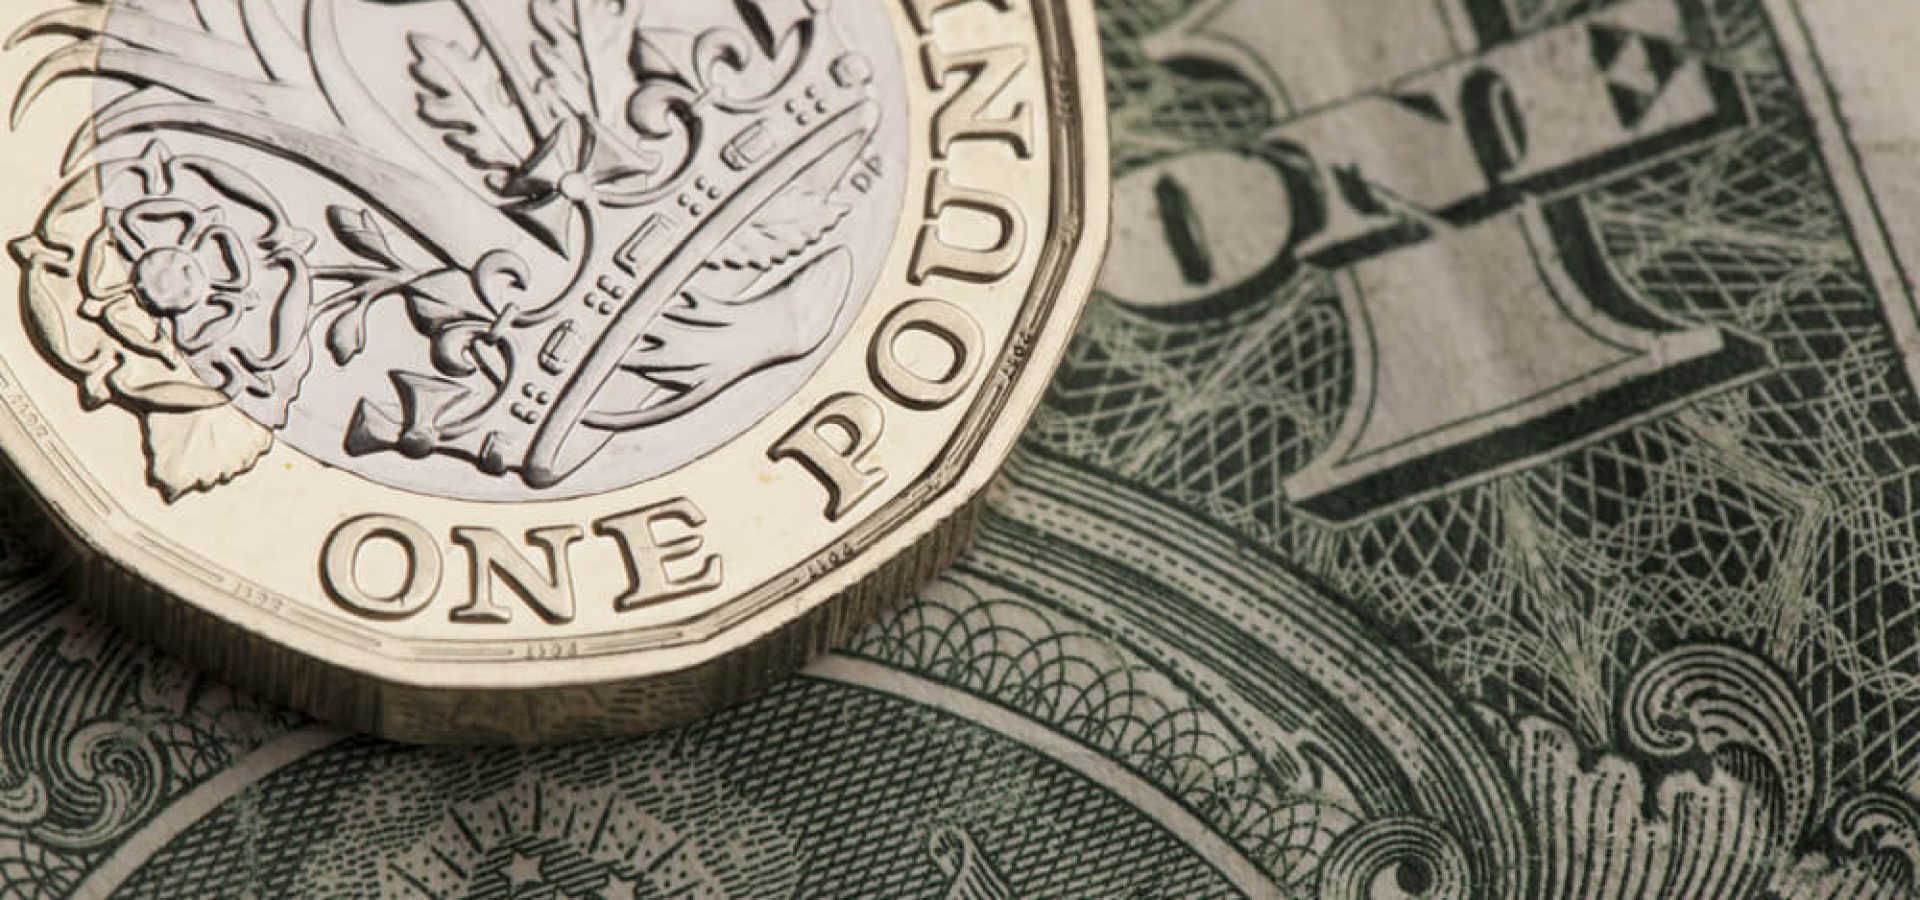 Wibest – Forex Markets: Close up photo of sterling and dollar currency.